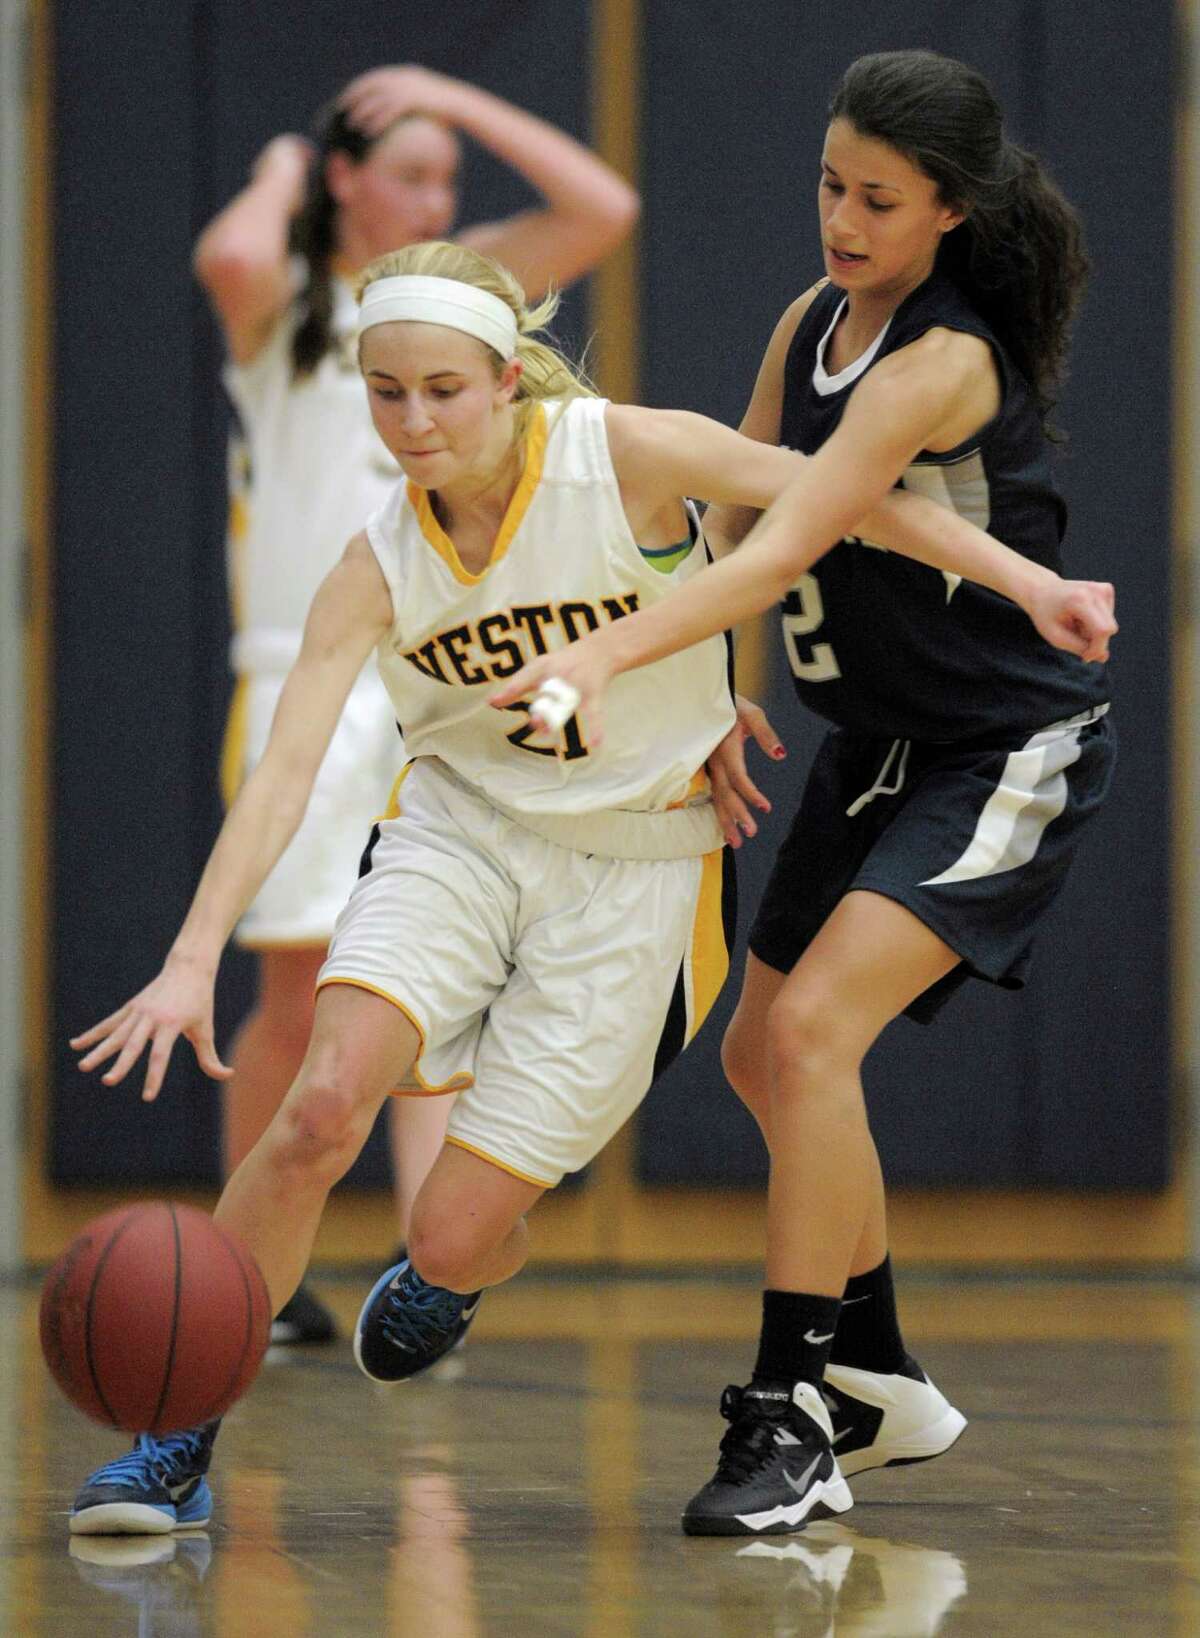 Weston's Taylor Kennedy (21) tries to dribble around Immaculate's Stephanie Bischop (2) during the SWC girls high school basketball game between Immaculate and Weston high schools, on Tuesday night, December 16, 2014, played at WestonHigh School, Weston, Conn.